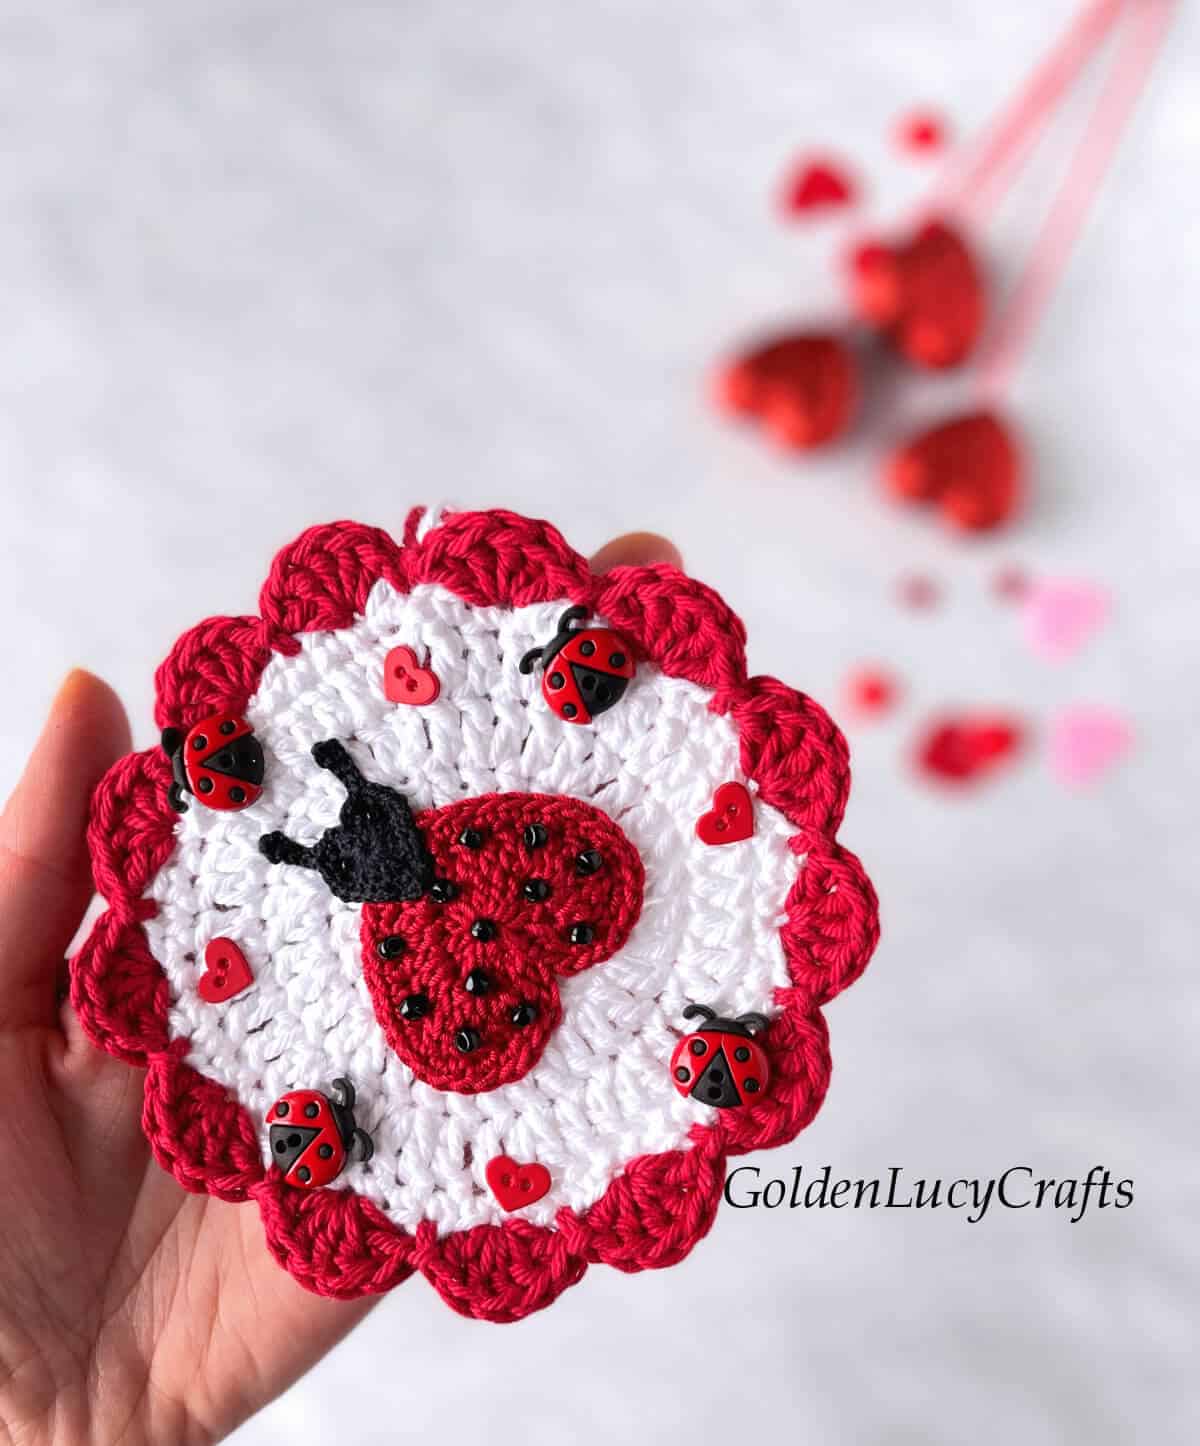 Crochet ladybug ornament in the palm of a hand.